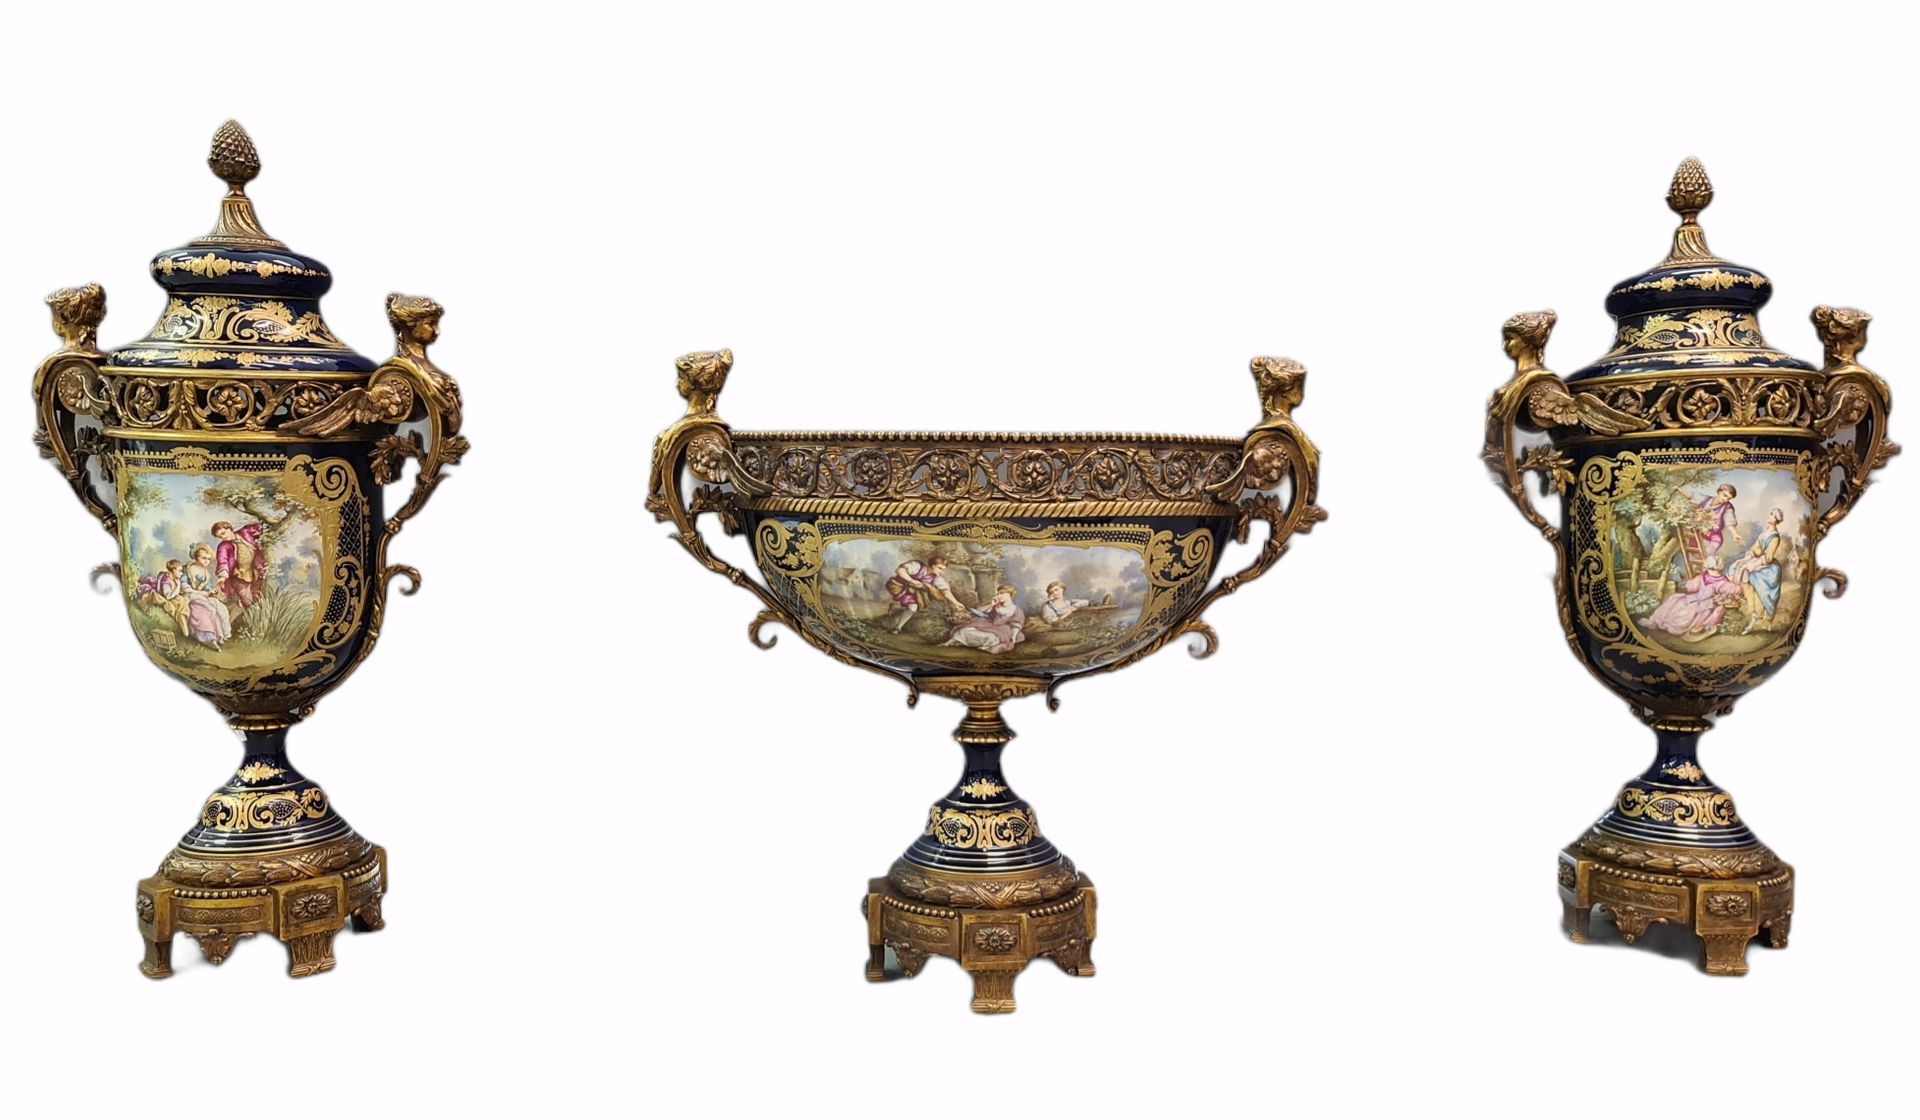 Impressive French porcelain set in the Sèvres style richly decorated with bronzes. In the Napoleon I